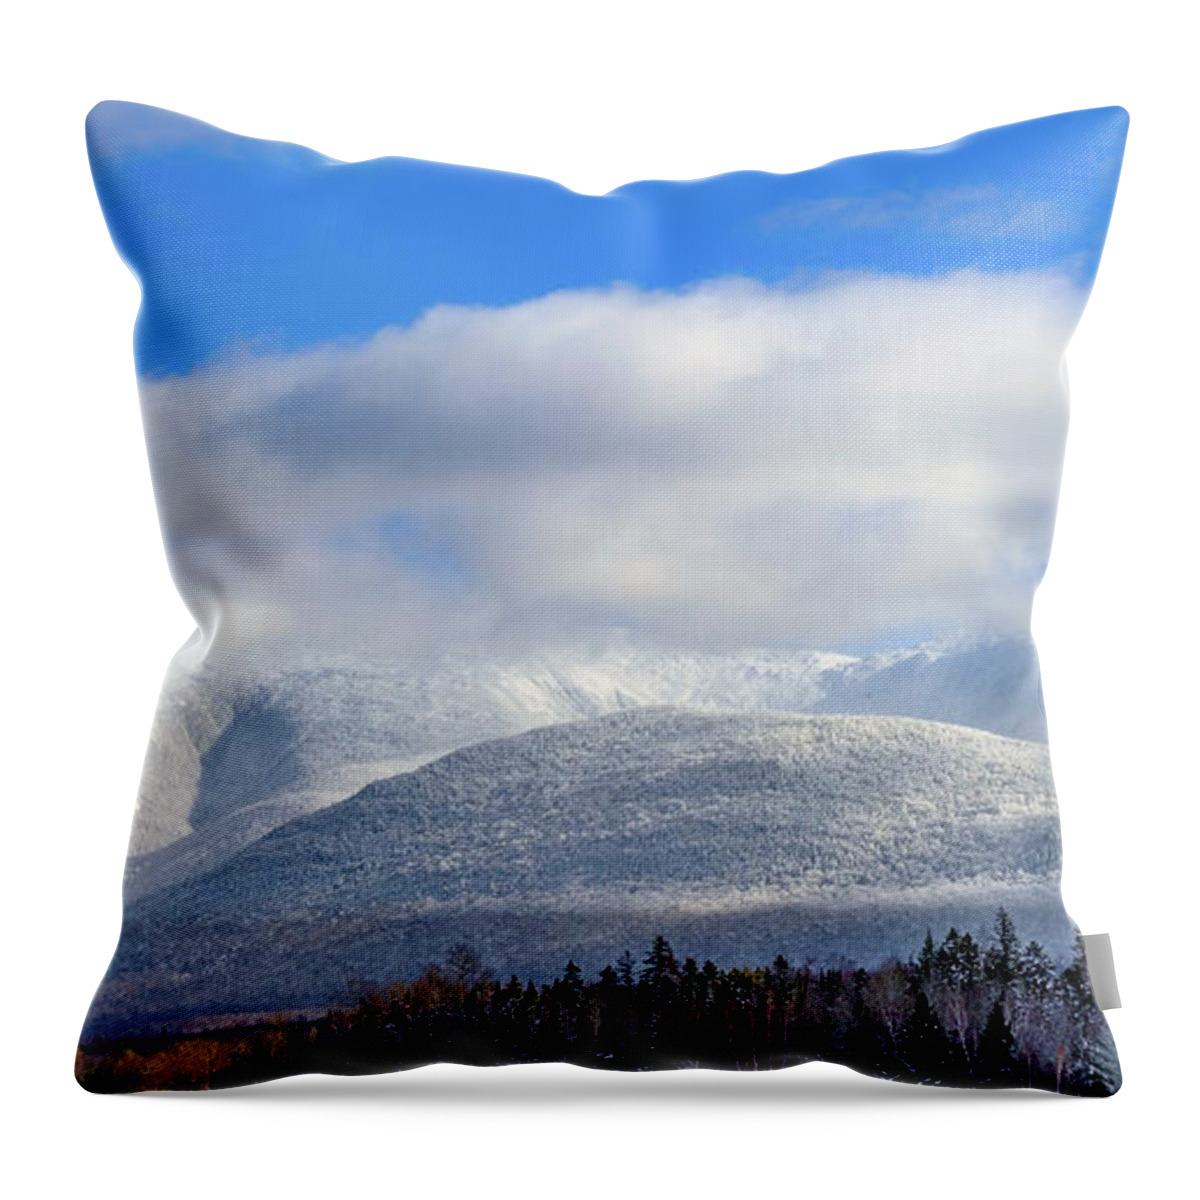 New Hampshire Throw Pillow featuring the photograph Northern Views, The Presidential Range In Winter. by Jeff Sinon